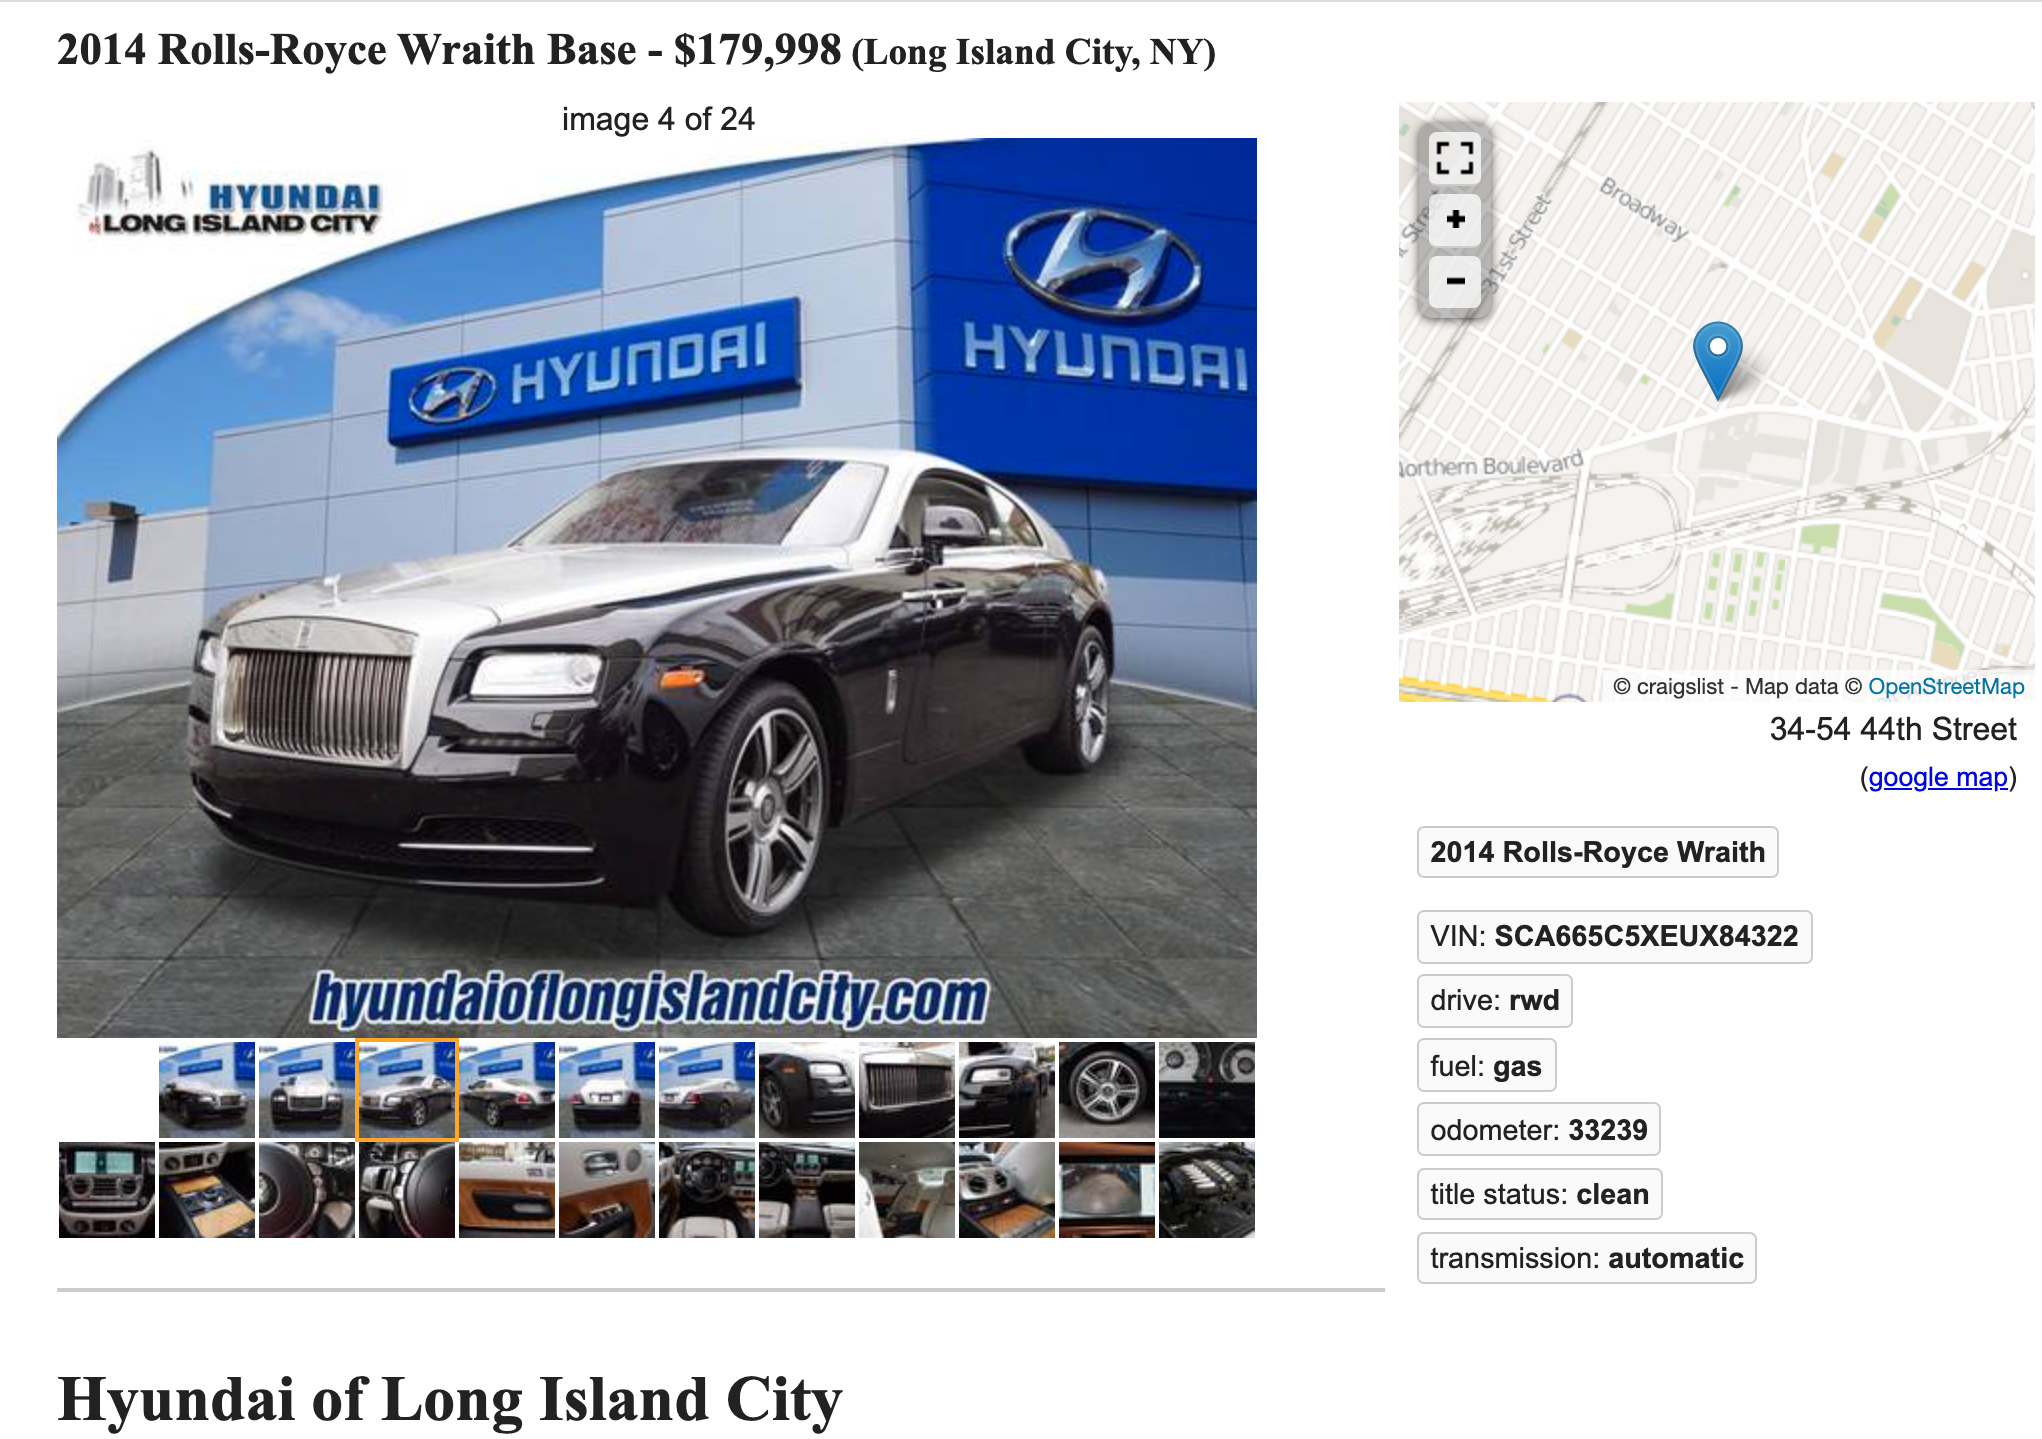 A Hyundai Dealer Put A Rolls-Royce On Craigslist And I Have So Many Questions